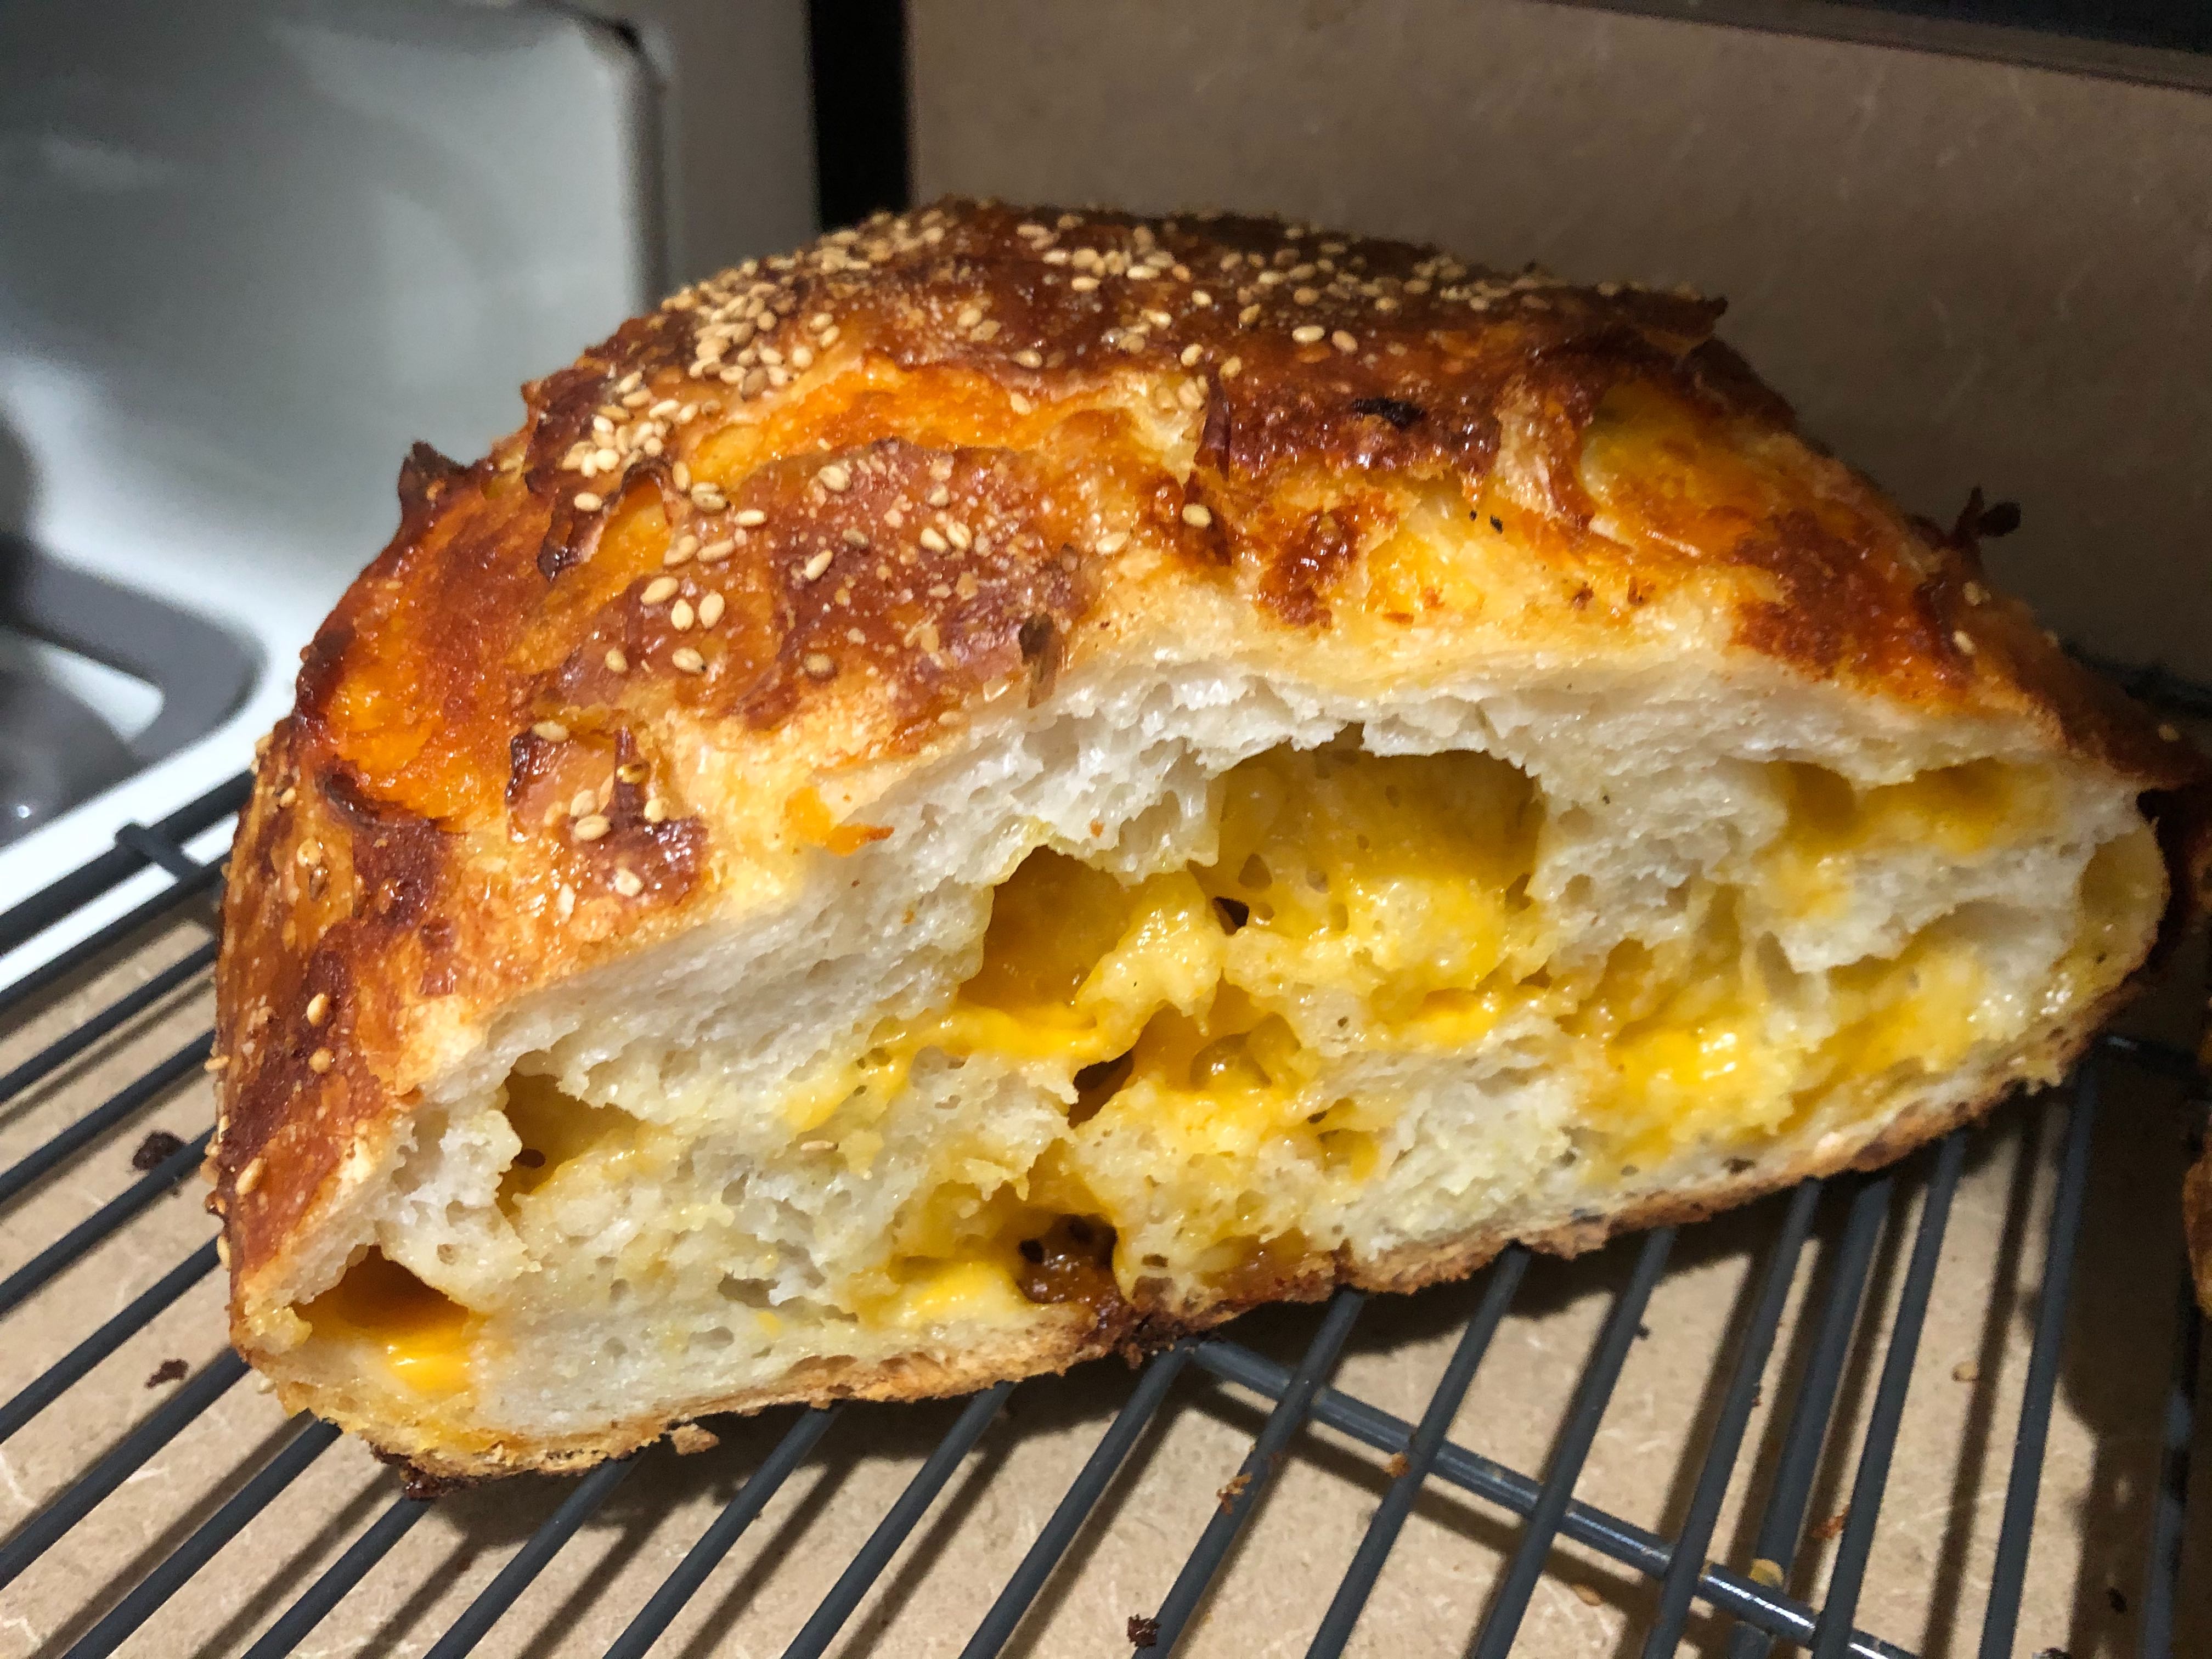 A loaf of cheese bread